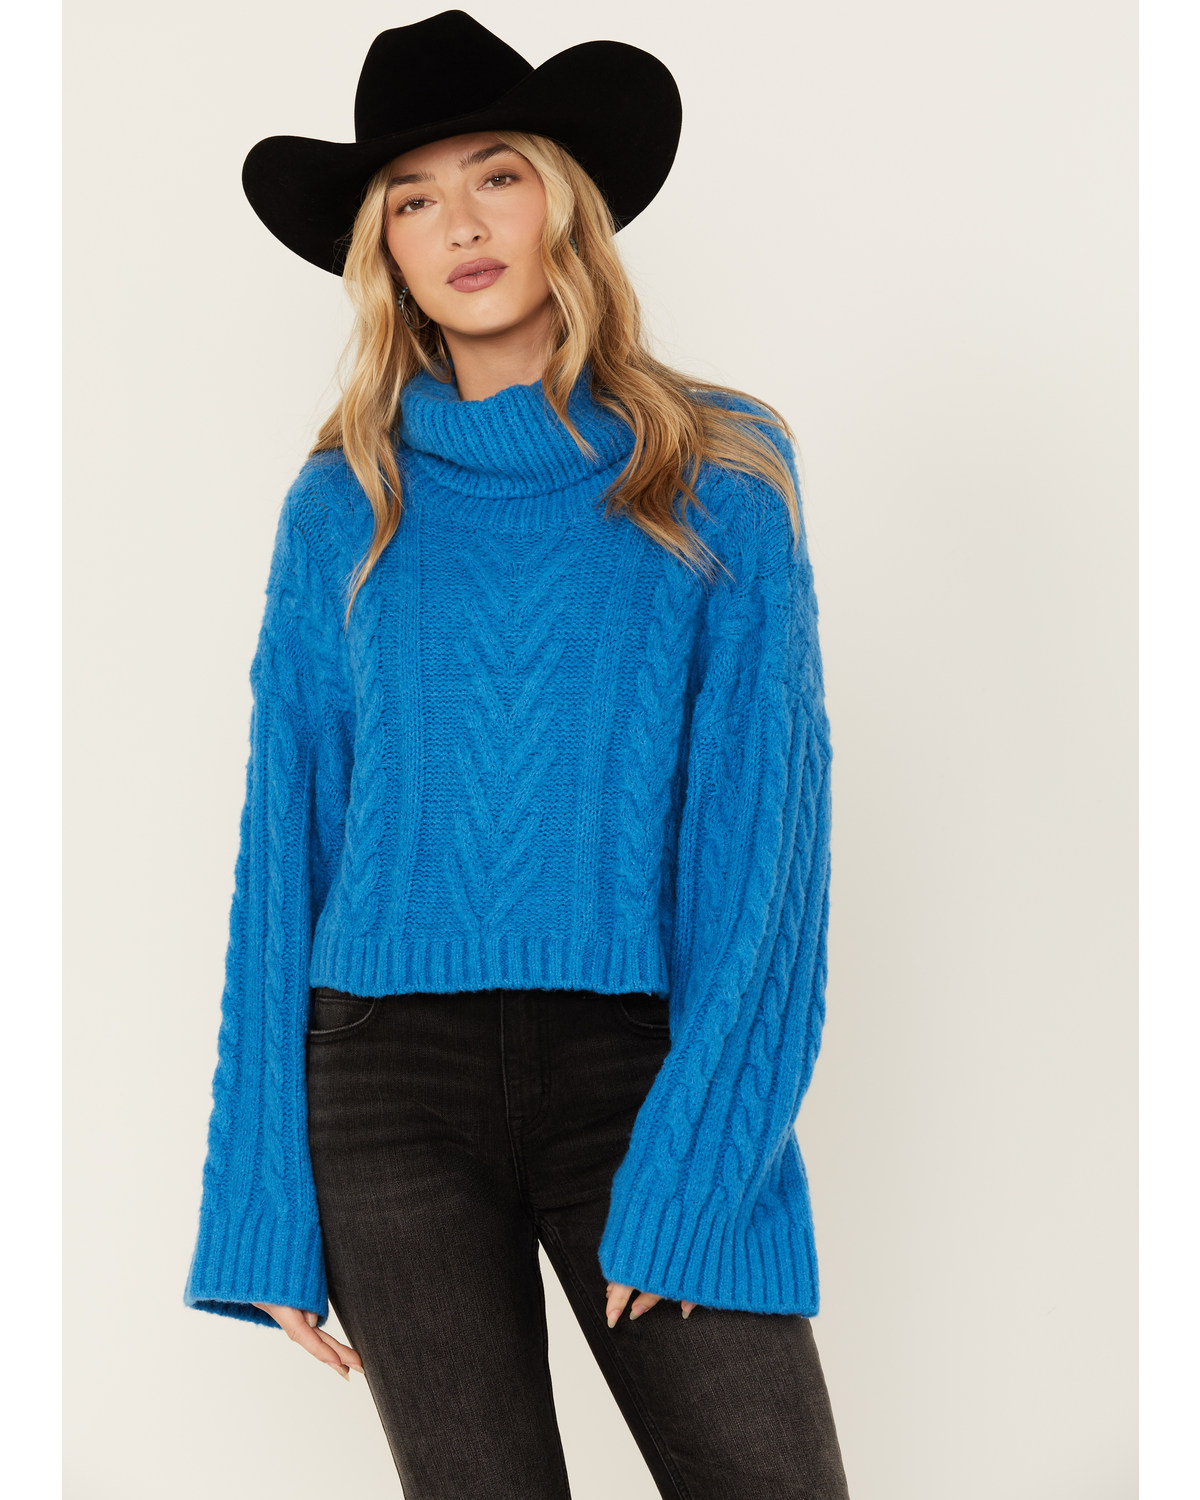 Revel Women's Turtleneck Cable Knit Cropped Sweater